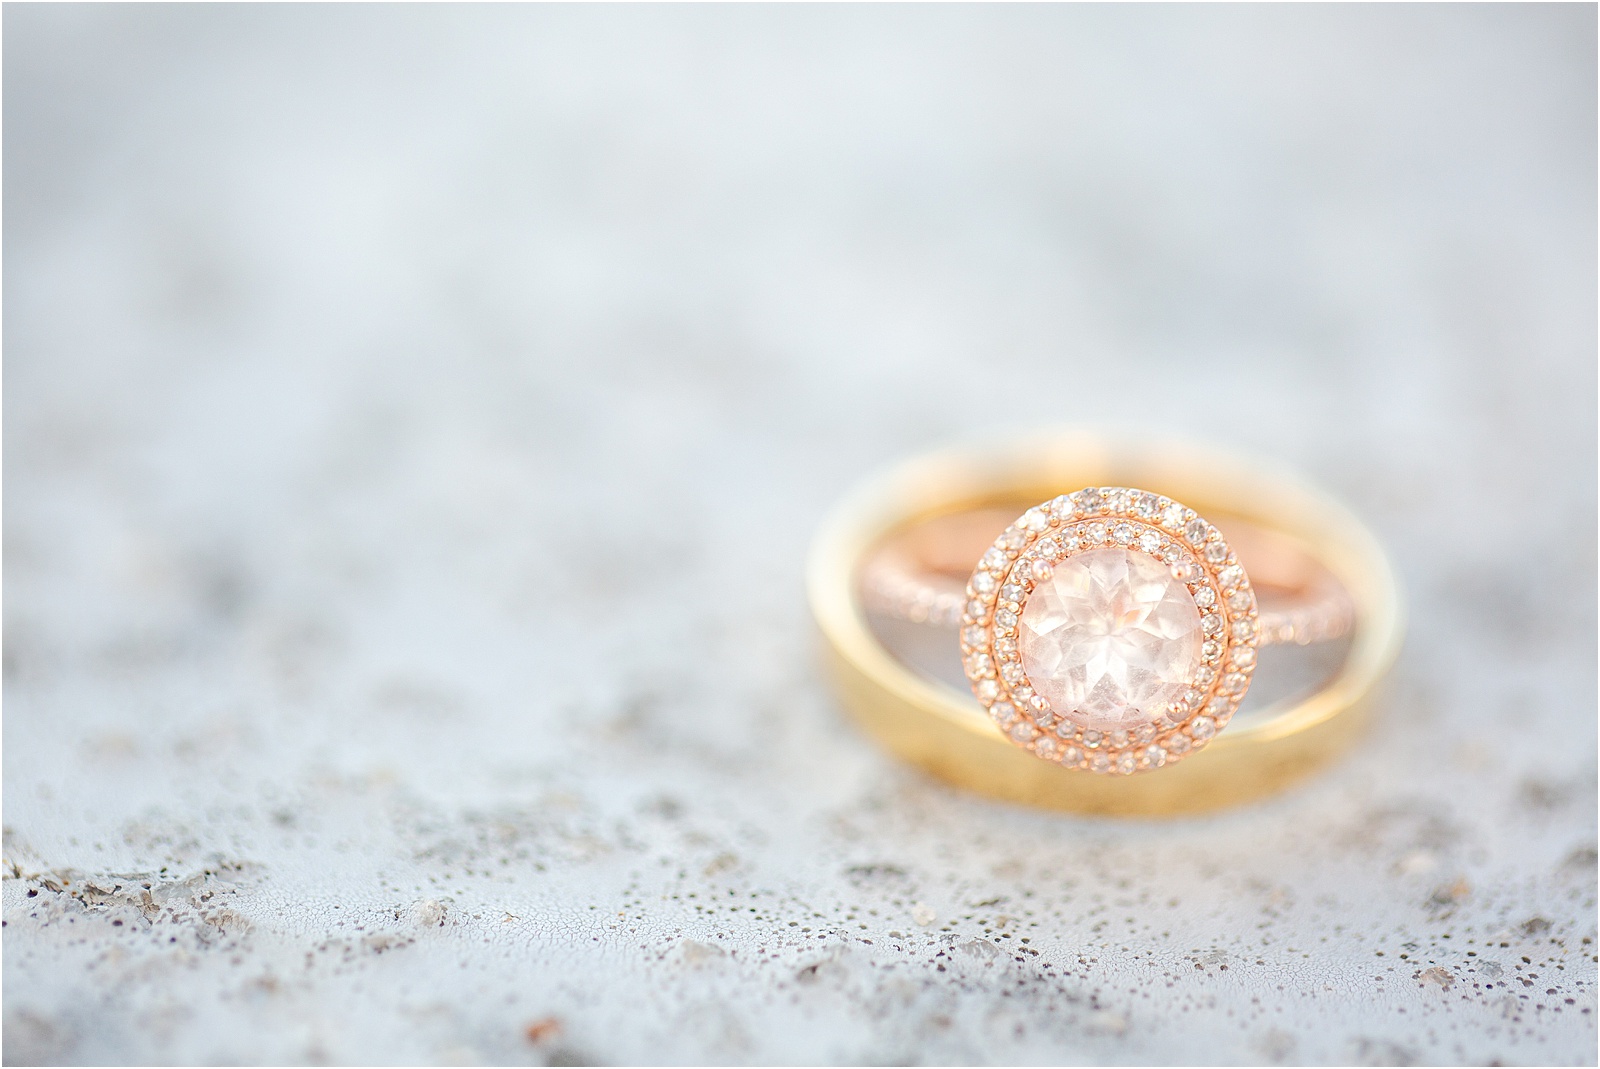 Yellow gold engagement ring and wedding ring on stone